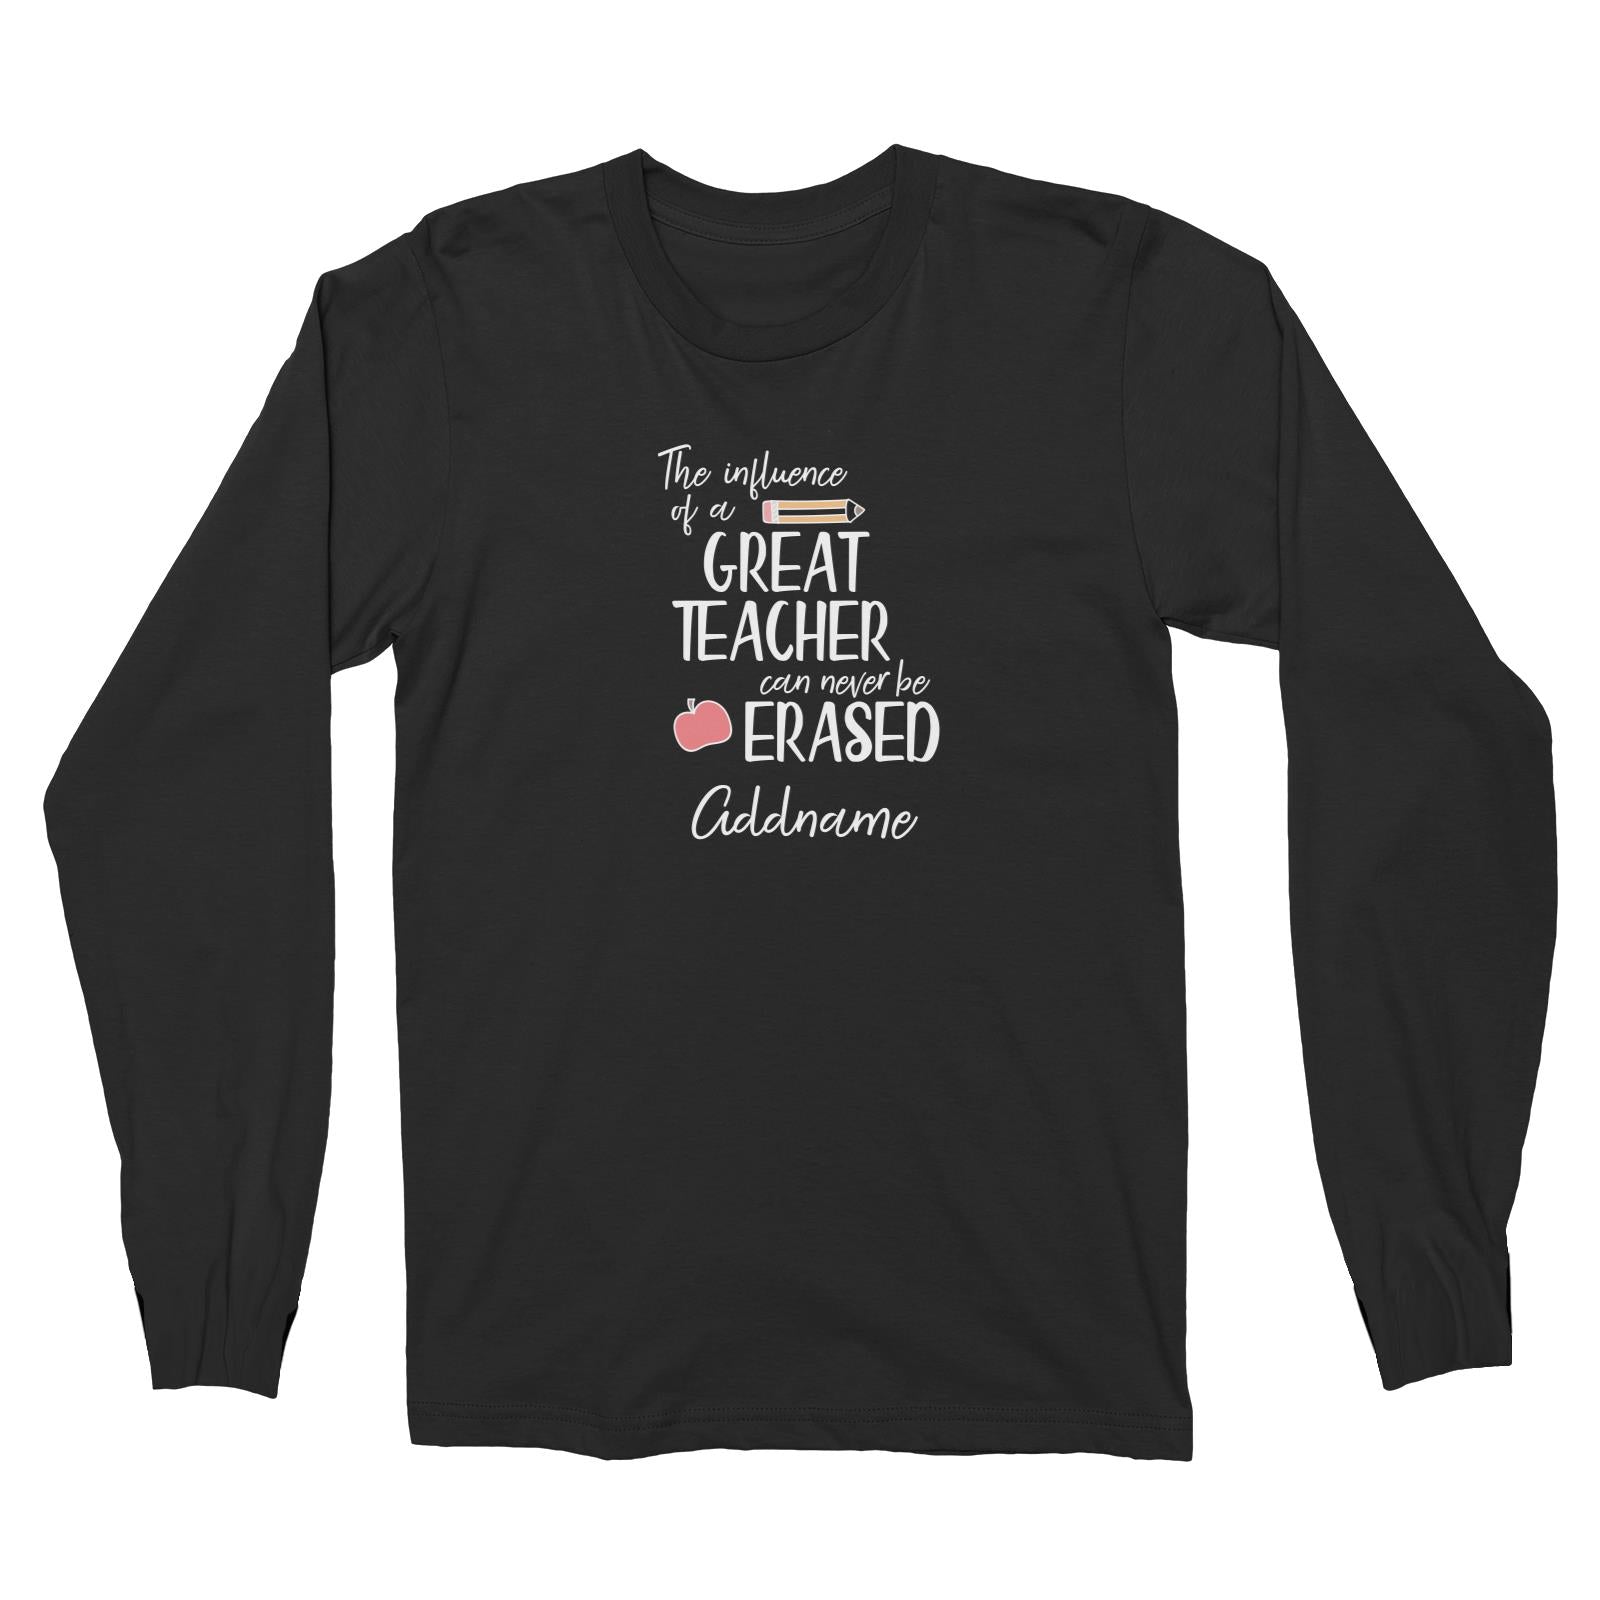 Teacher Quotes The Influence Of A Great Teacher Can Never Be Erased Addname Long Sleeve Unisex T-Shirt